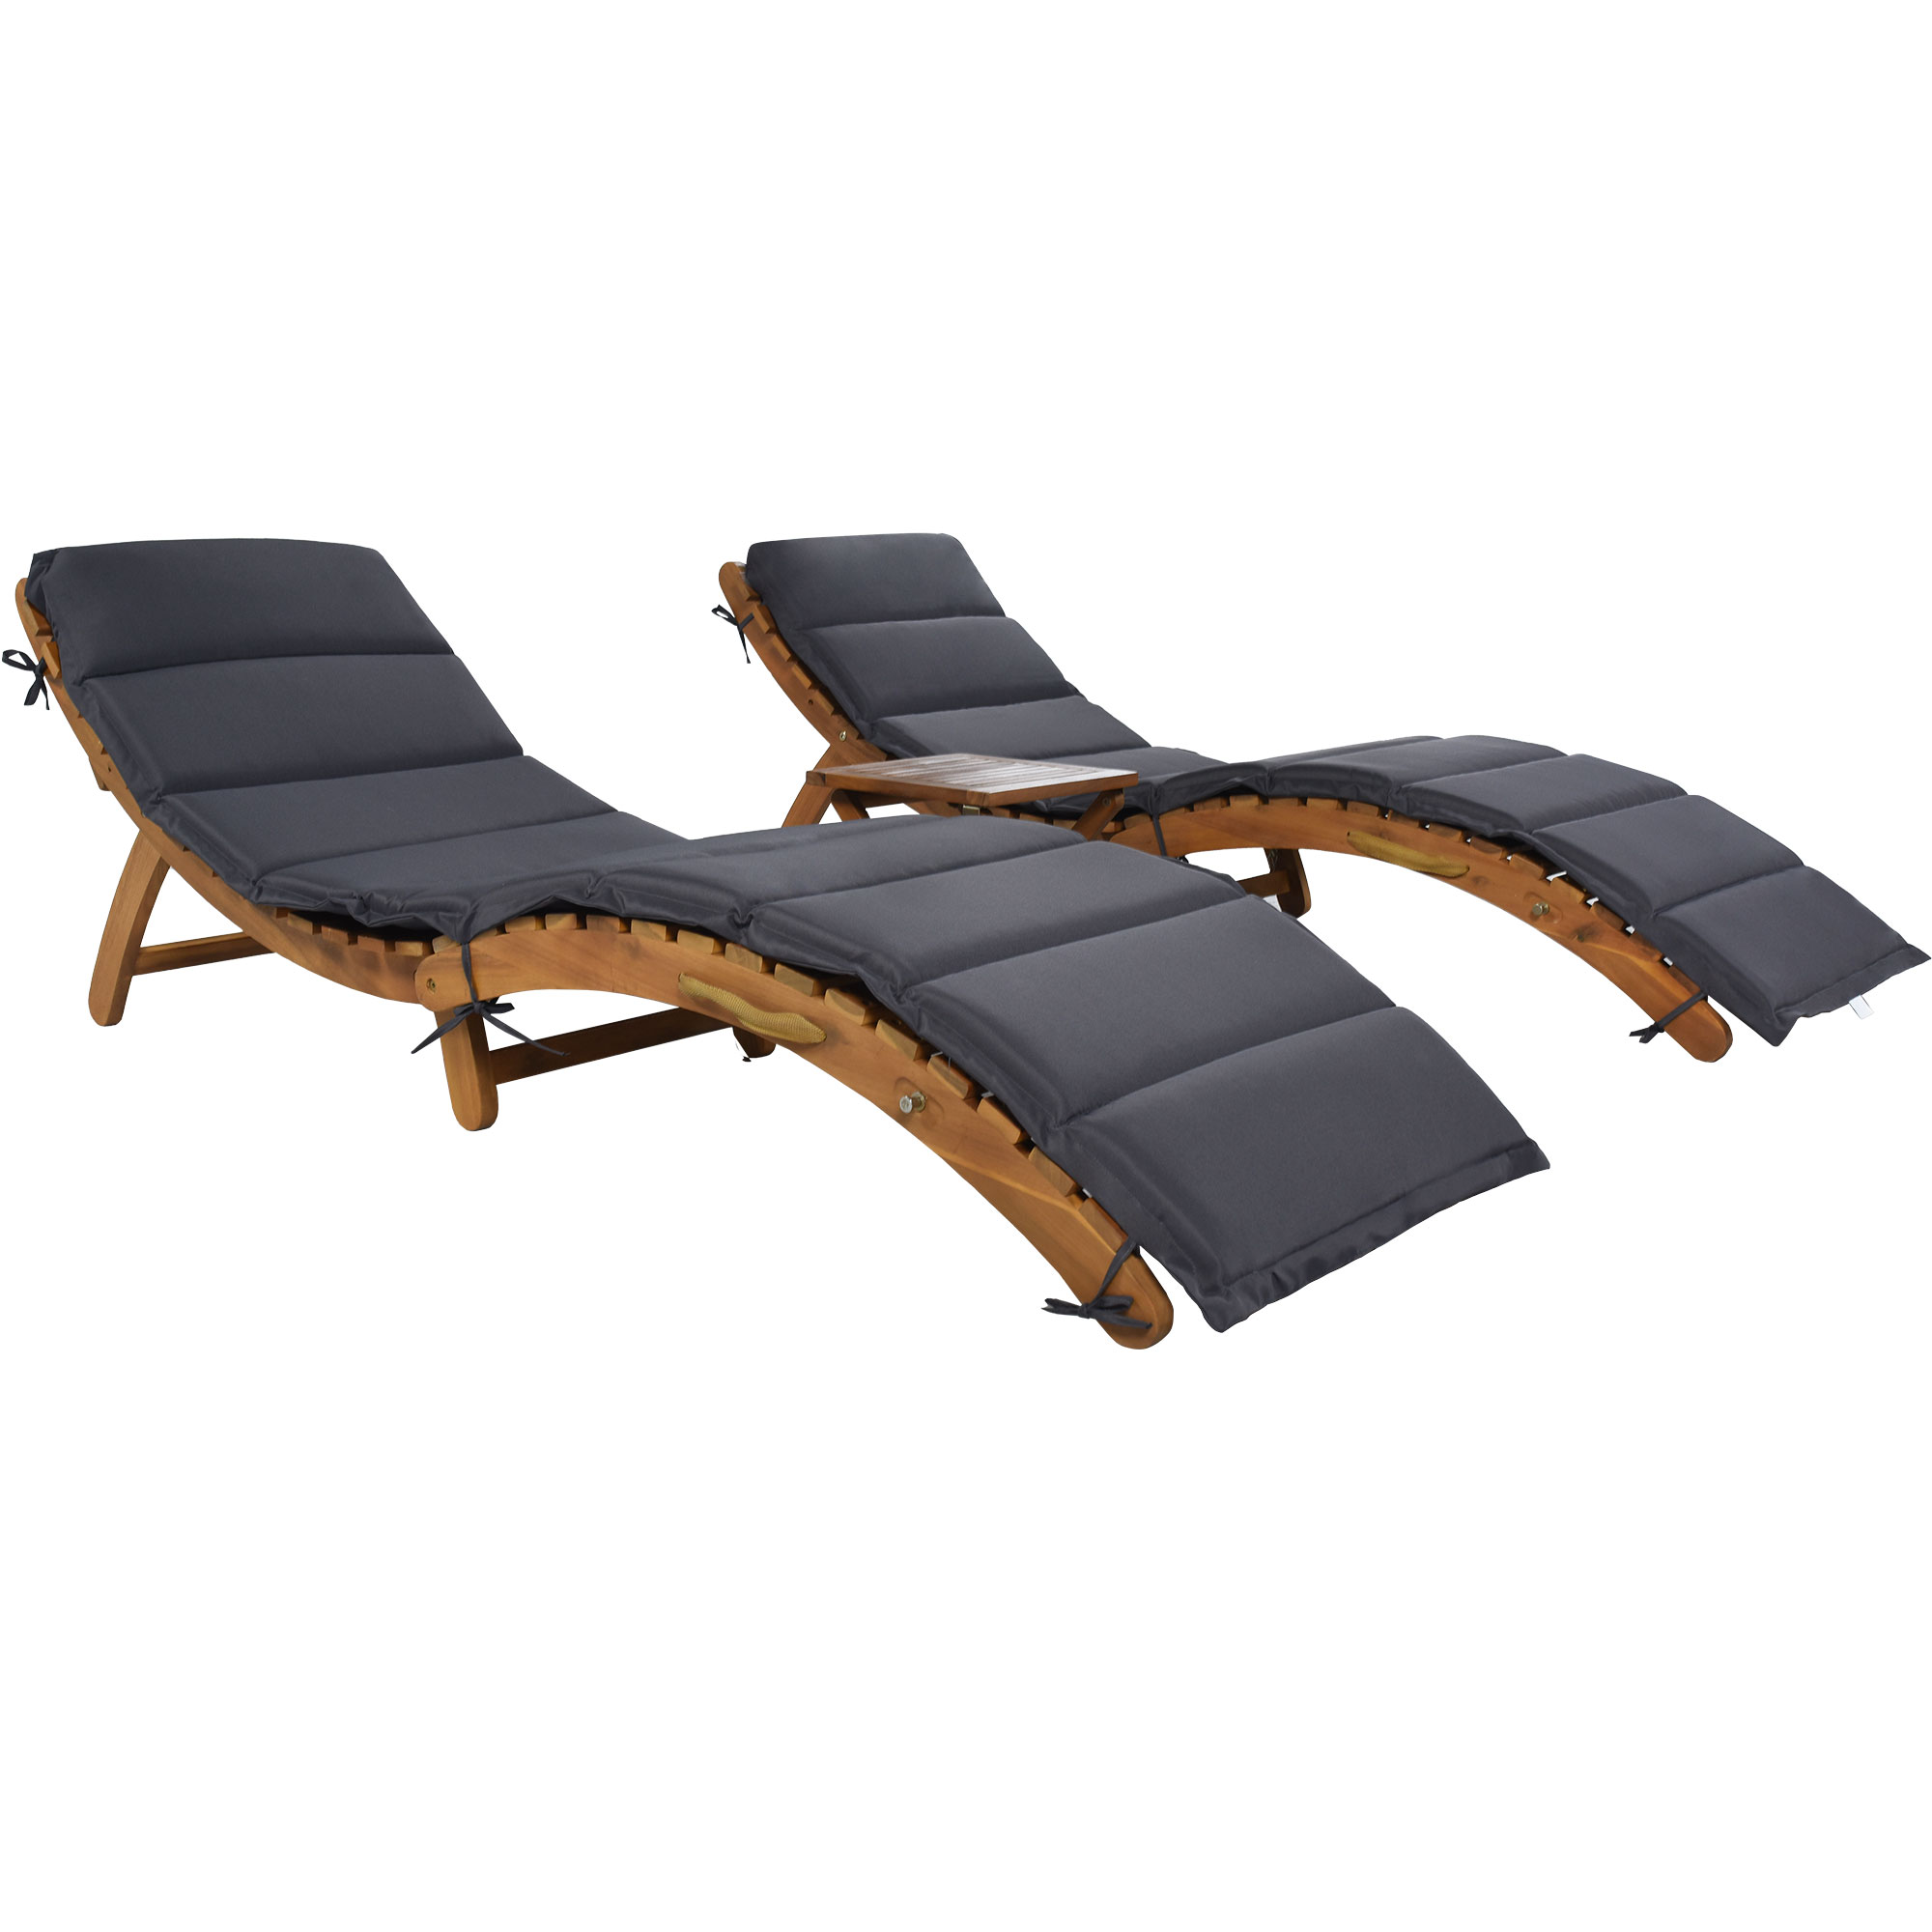 ENYOPRO Patio Lounge Chairs Set of 3, Outdoor Wood Portable Chaise Lounge Chairs with Foldable Tea Table and Cushions, Fit for Pool Porch Backyard Patio, Brown Finish + Dark Gray Cushion, K2702 - image 3 of 8